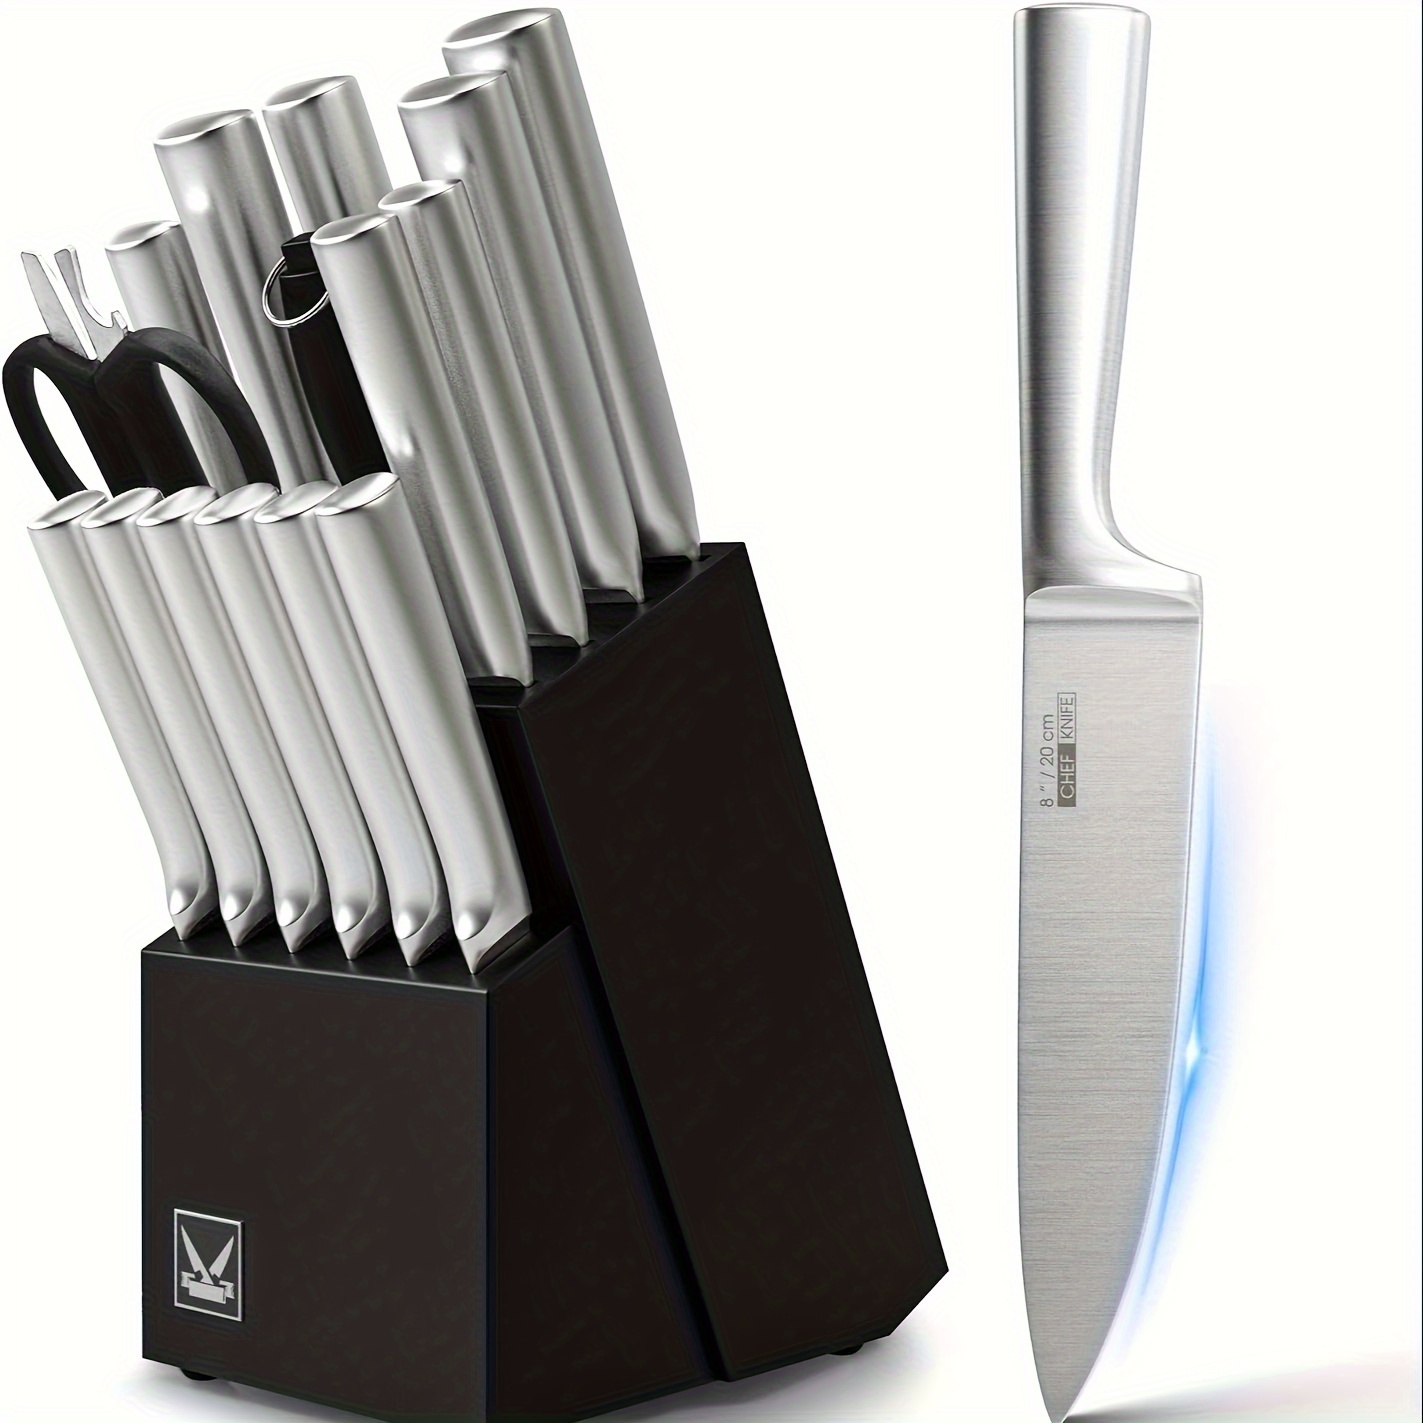 

Knife Set, 16 Pieces Kitchen Knife Set With Wood Block, Chef Knife With 6 Pieces Steak Knife, High Carbon Stainless Steel Japanese Knives For Multipurpose Cooking